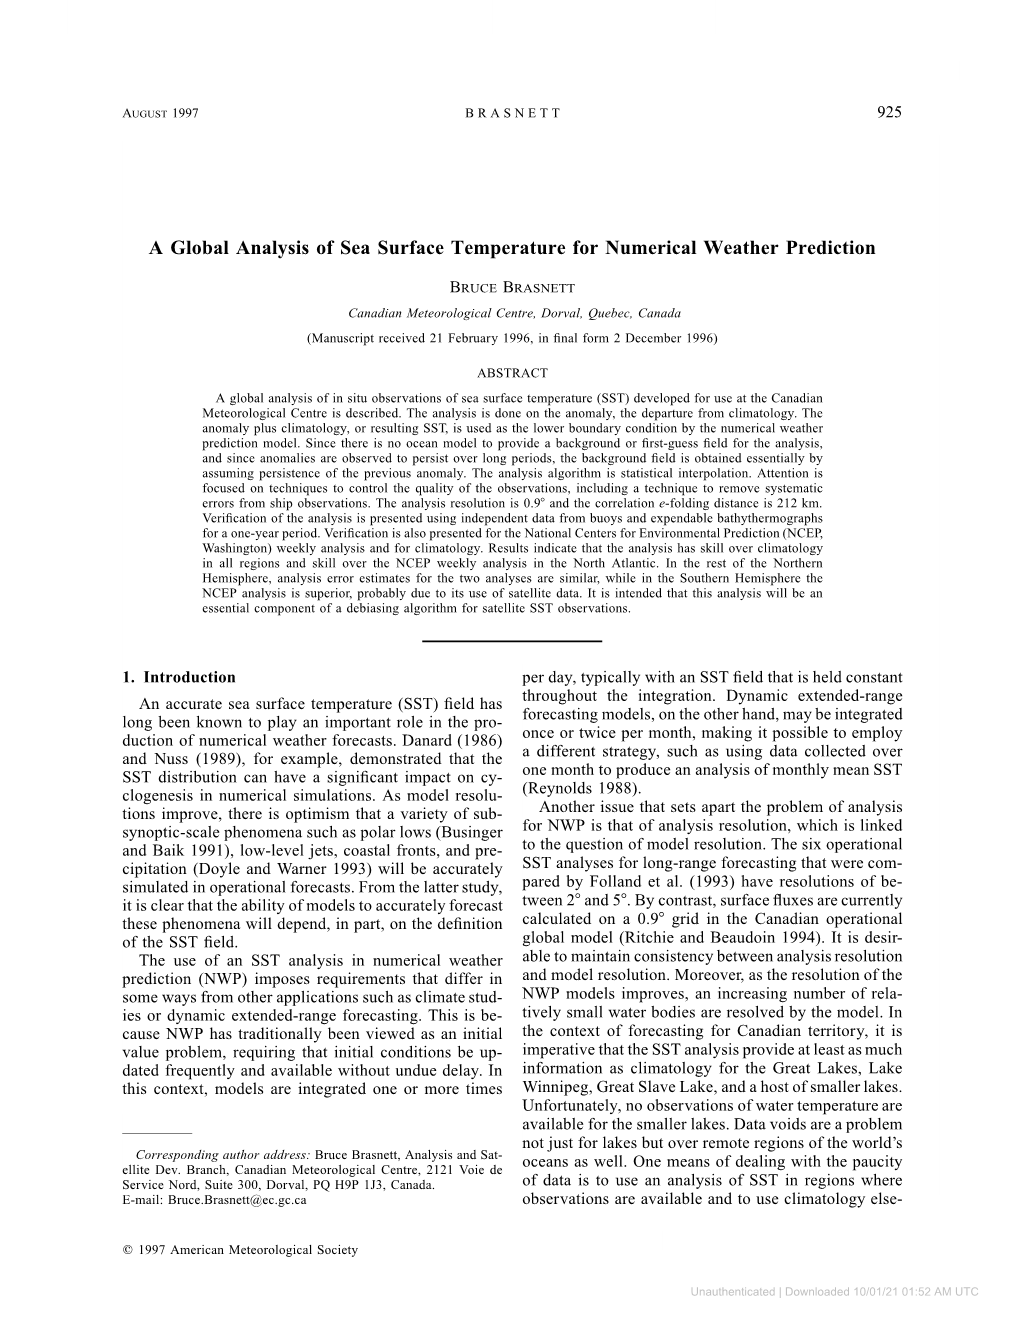 A Global Analysis of Sea Surface Temperature for Numerical Weather Prediction